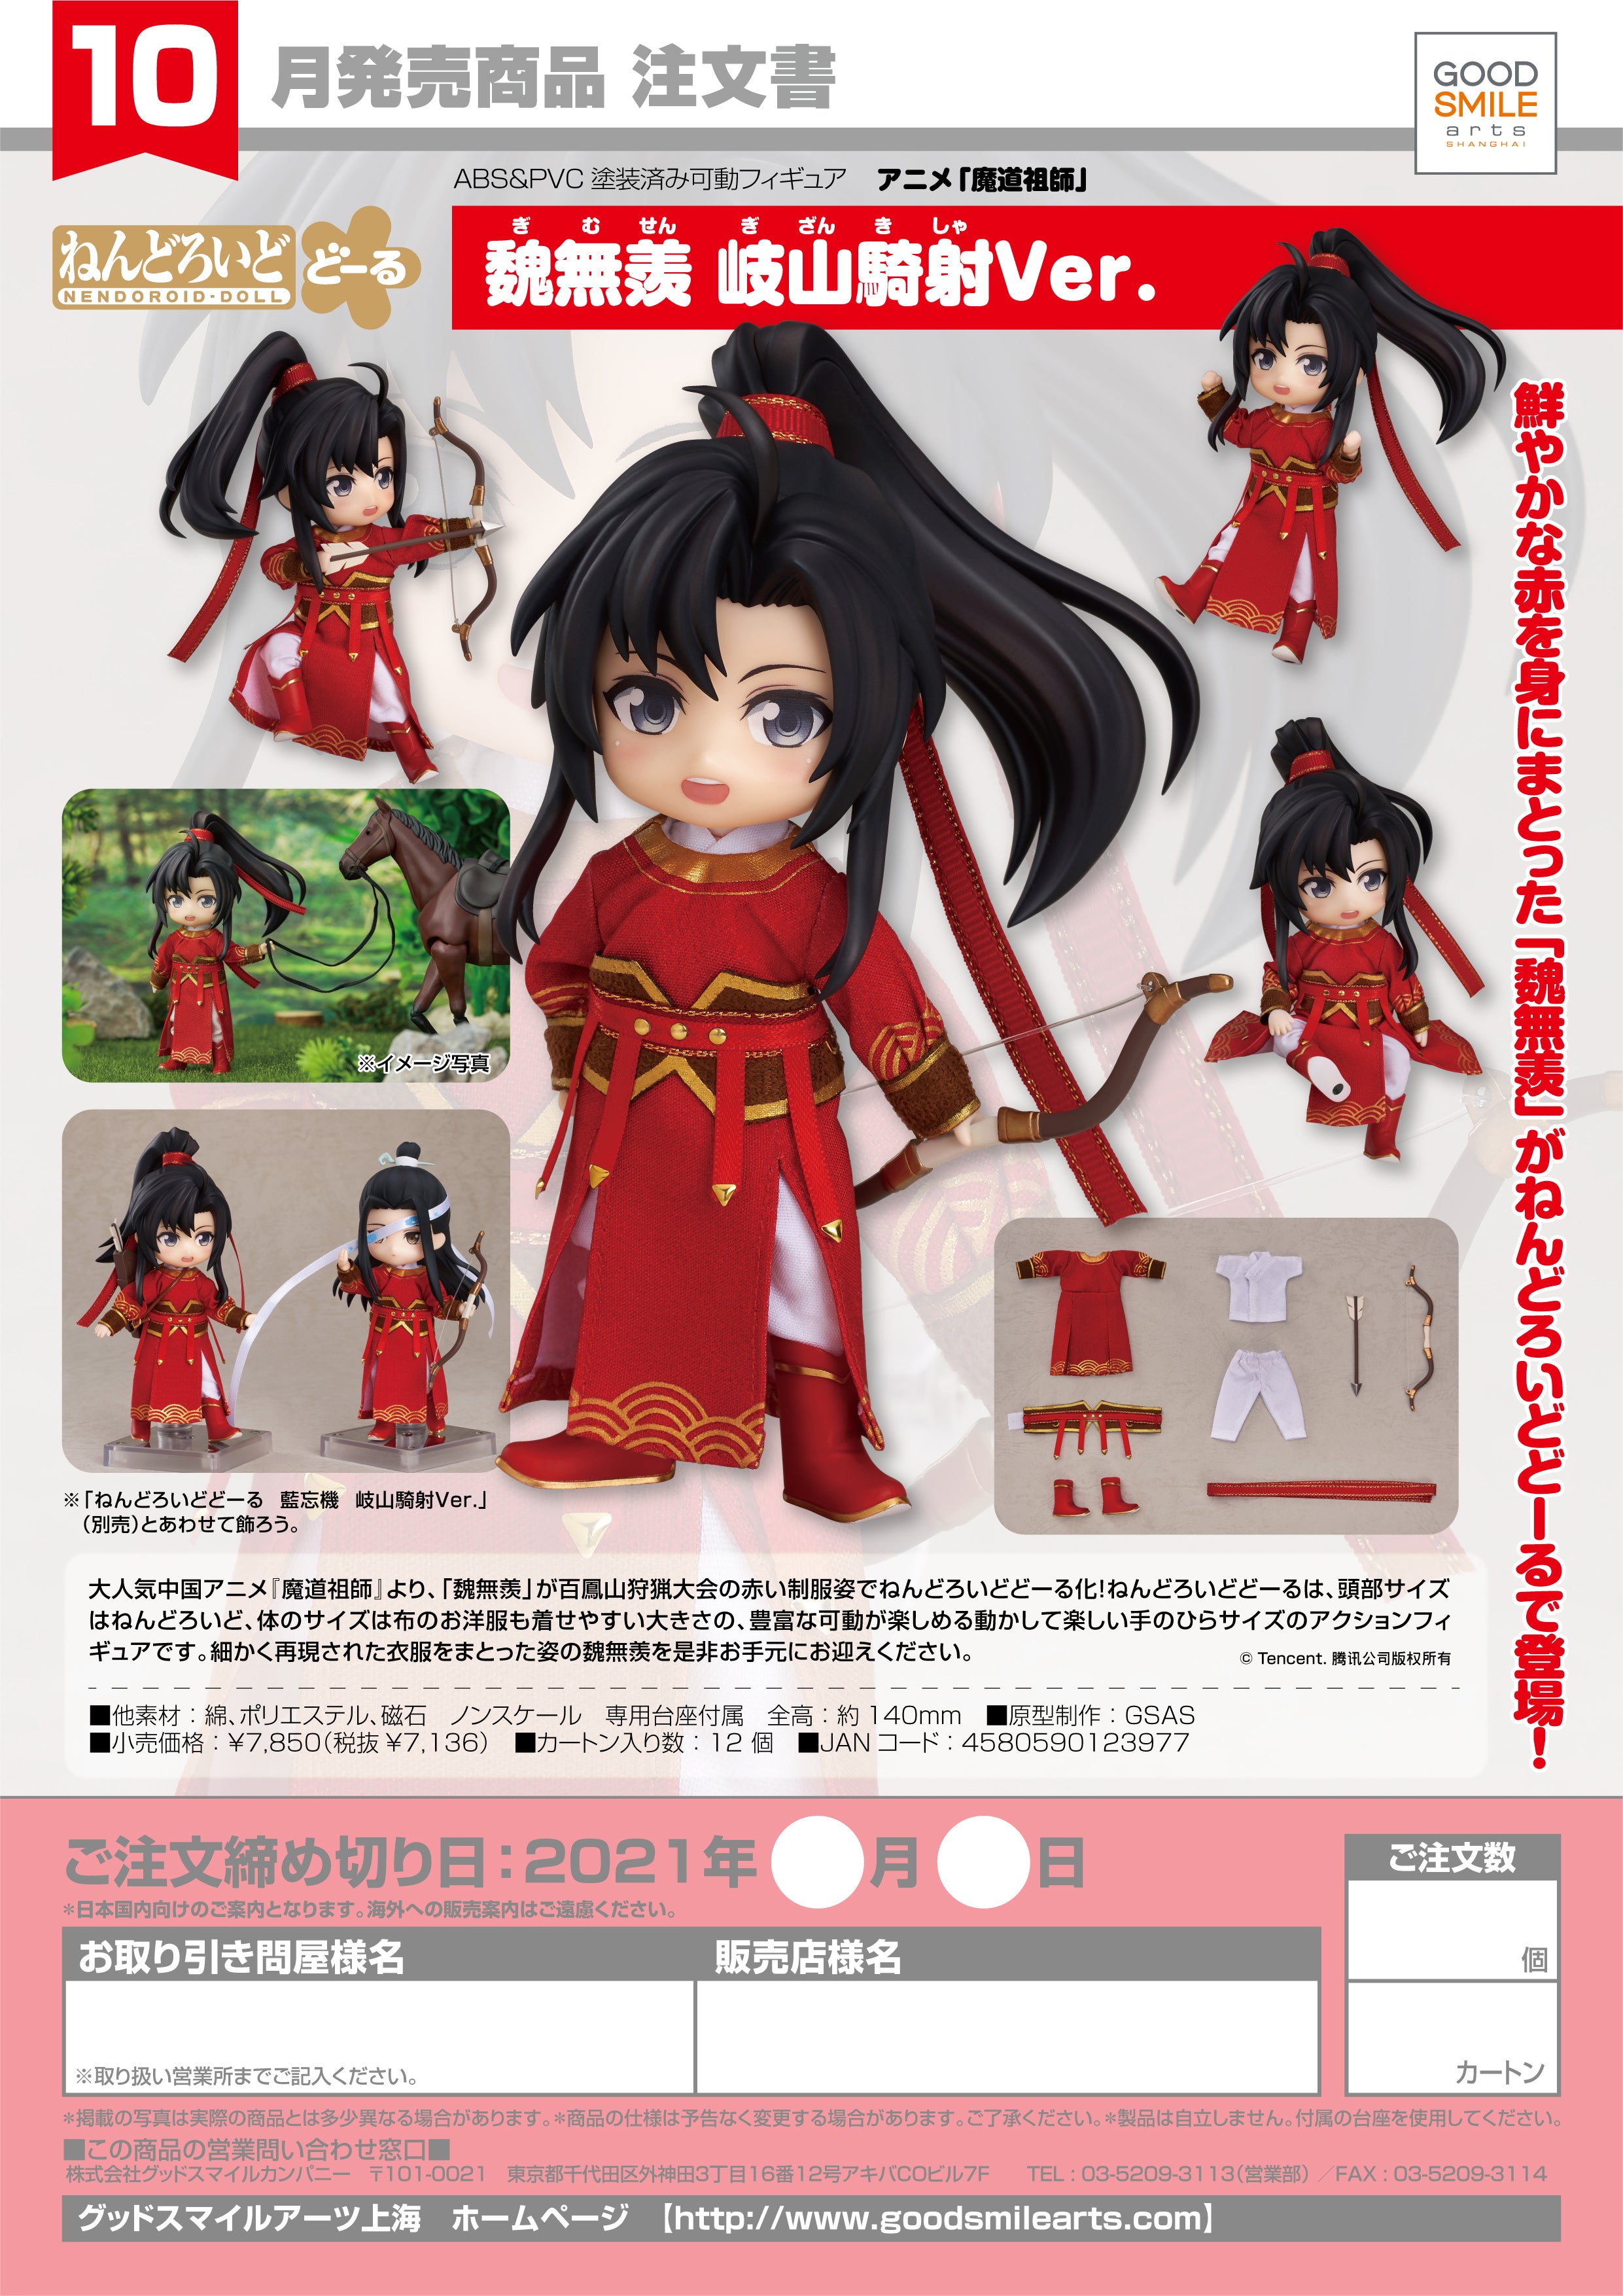 PRE-ORDER Nendoroid Doll - The Master of Diabolism - Wei Wuxian: Qishan Night-Hunt Ver.